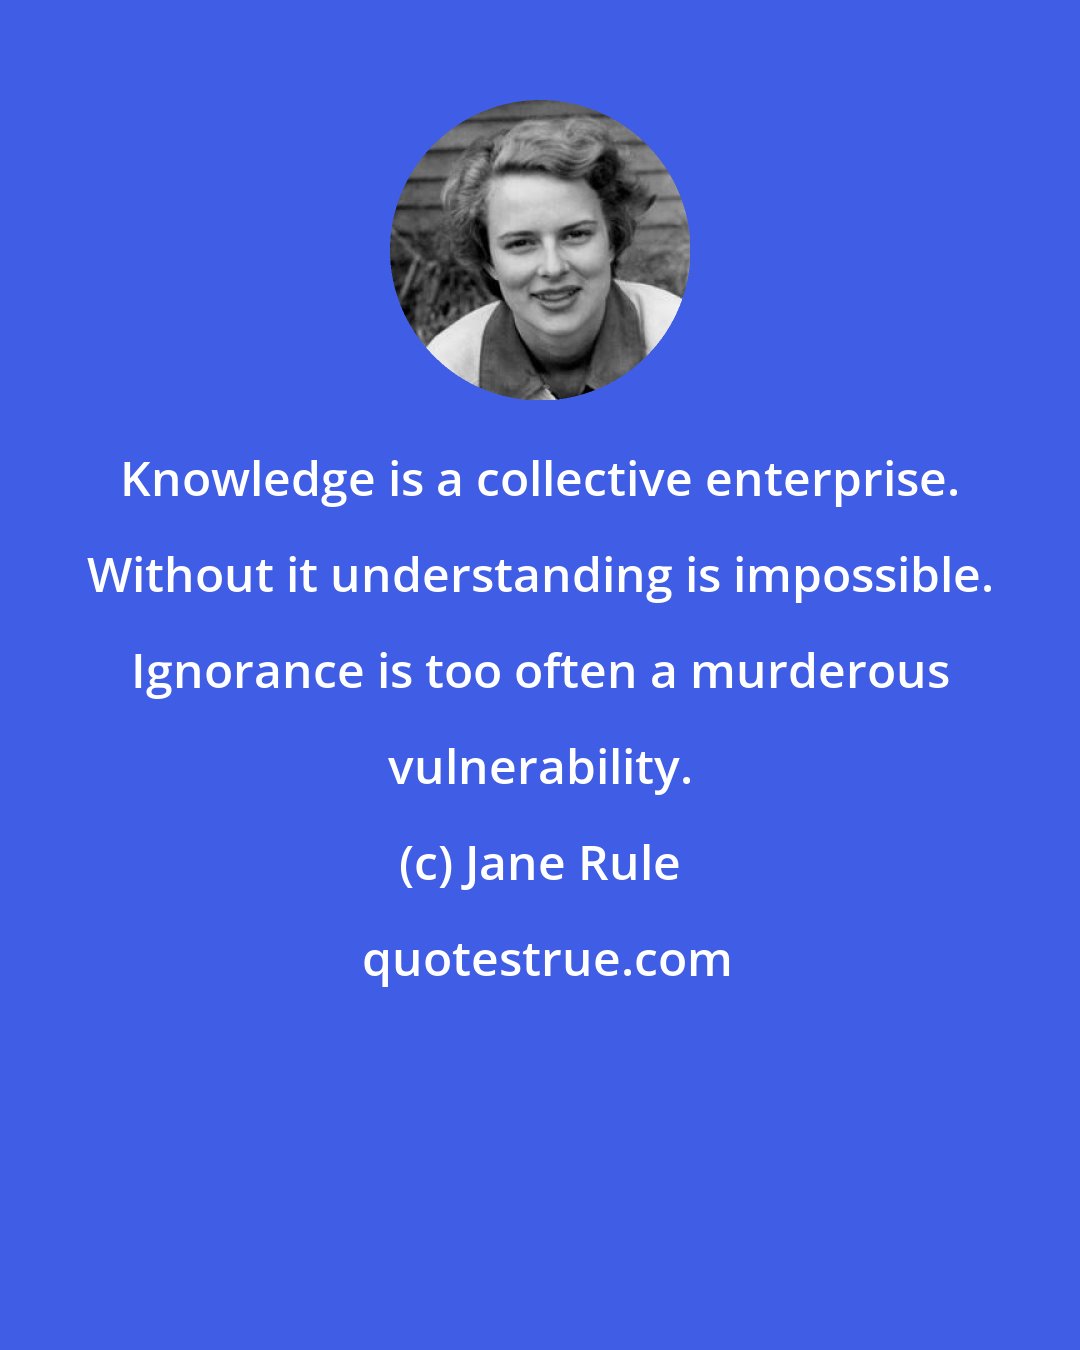 Jane Rule: Knowledge is a collective enterprise. Without it understanding is impossible. Ignorance is too often a murderous vulnerability.